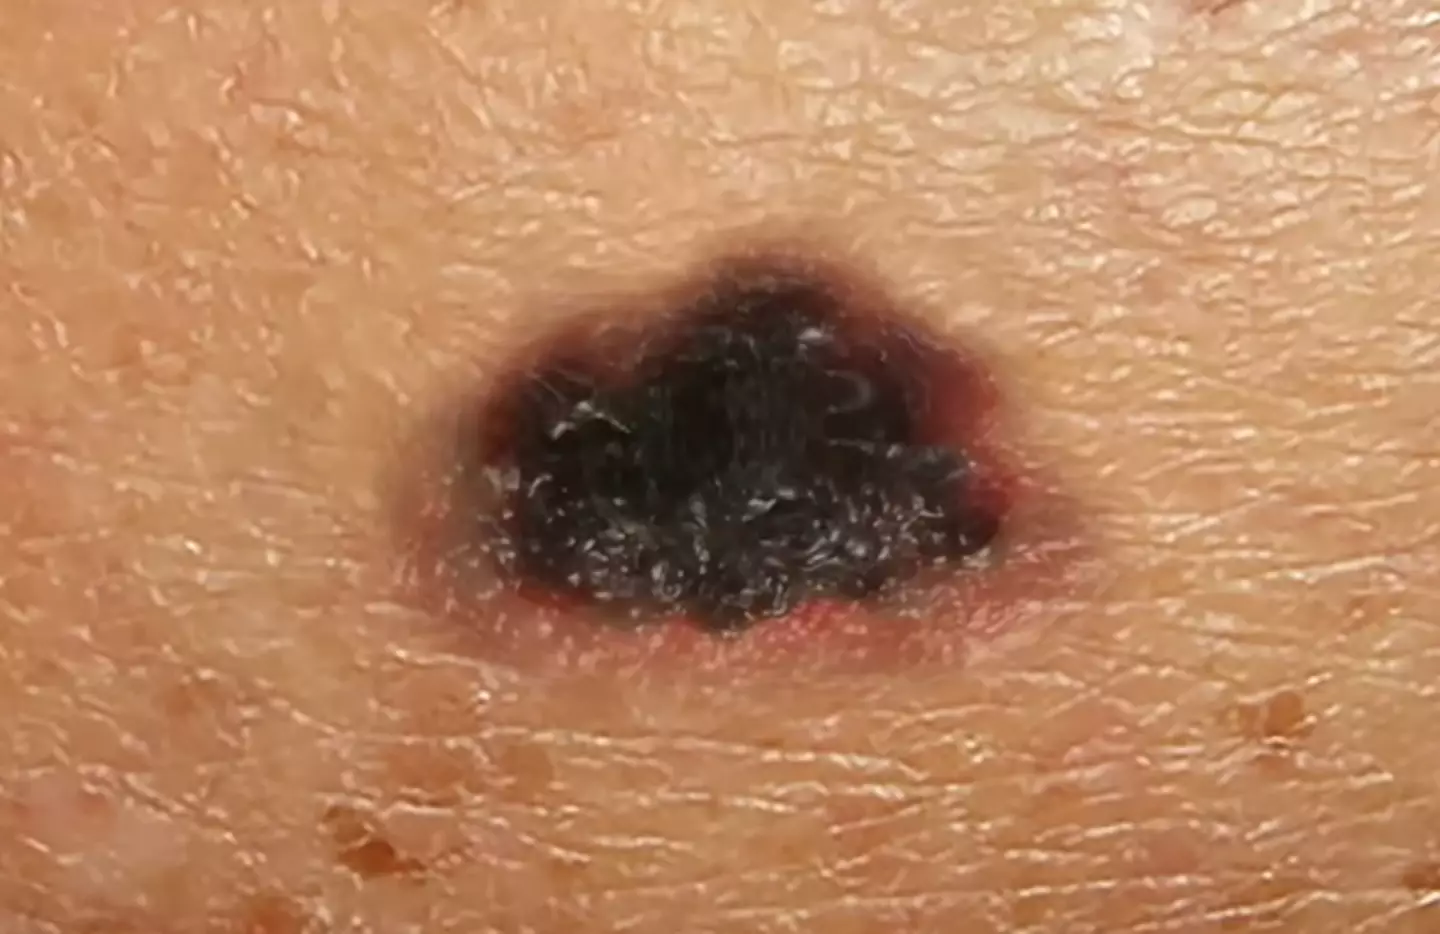 The clip showed a time-lapse from normal to Stage 4 melanoma over 10 years. (YouTube/@fauquierent)